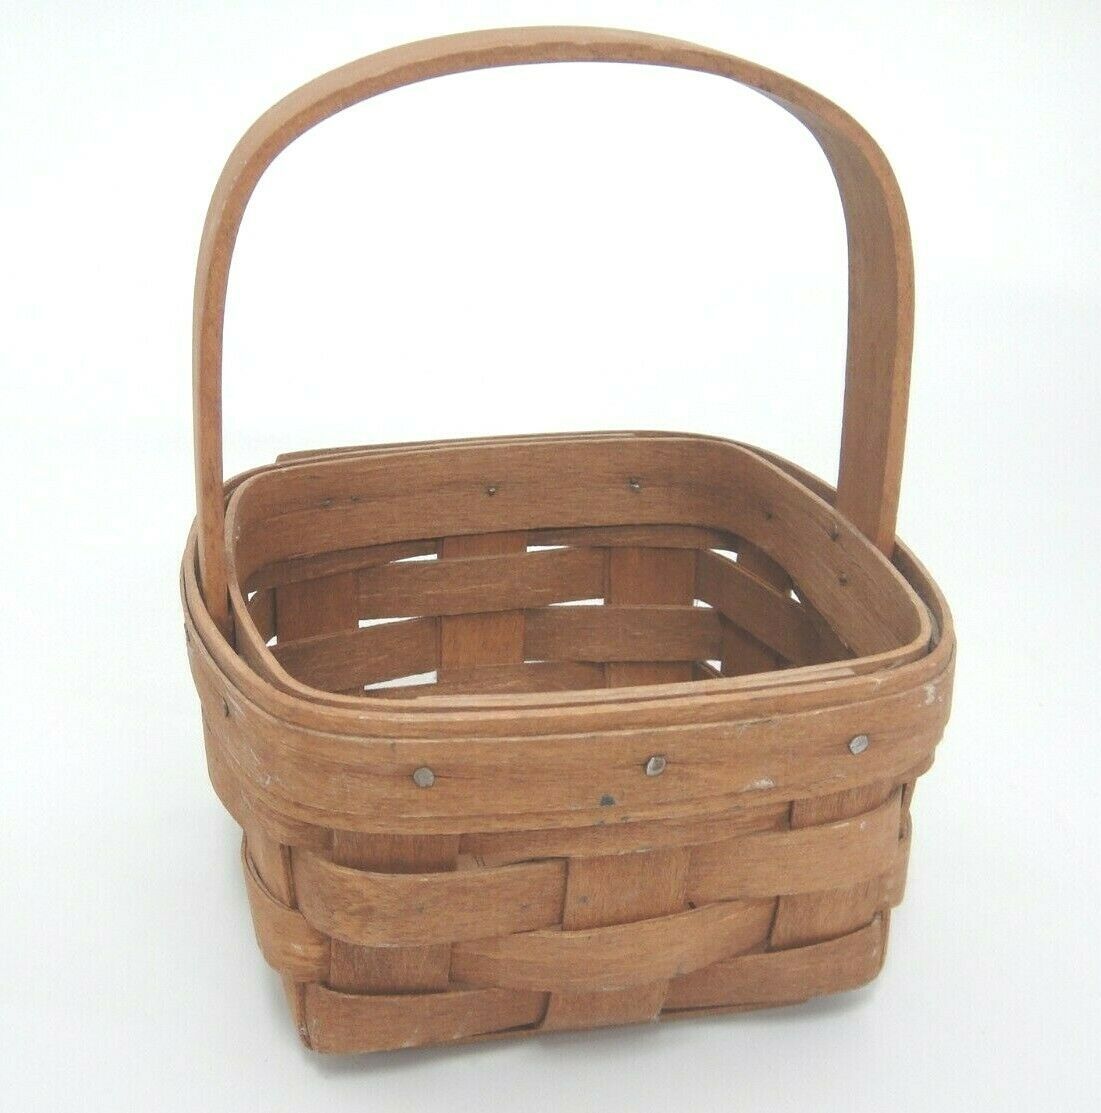 Primary image for Longaberger Small Key Basket #10723 Signed Dated 1985 Good No Breaks